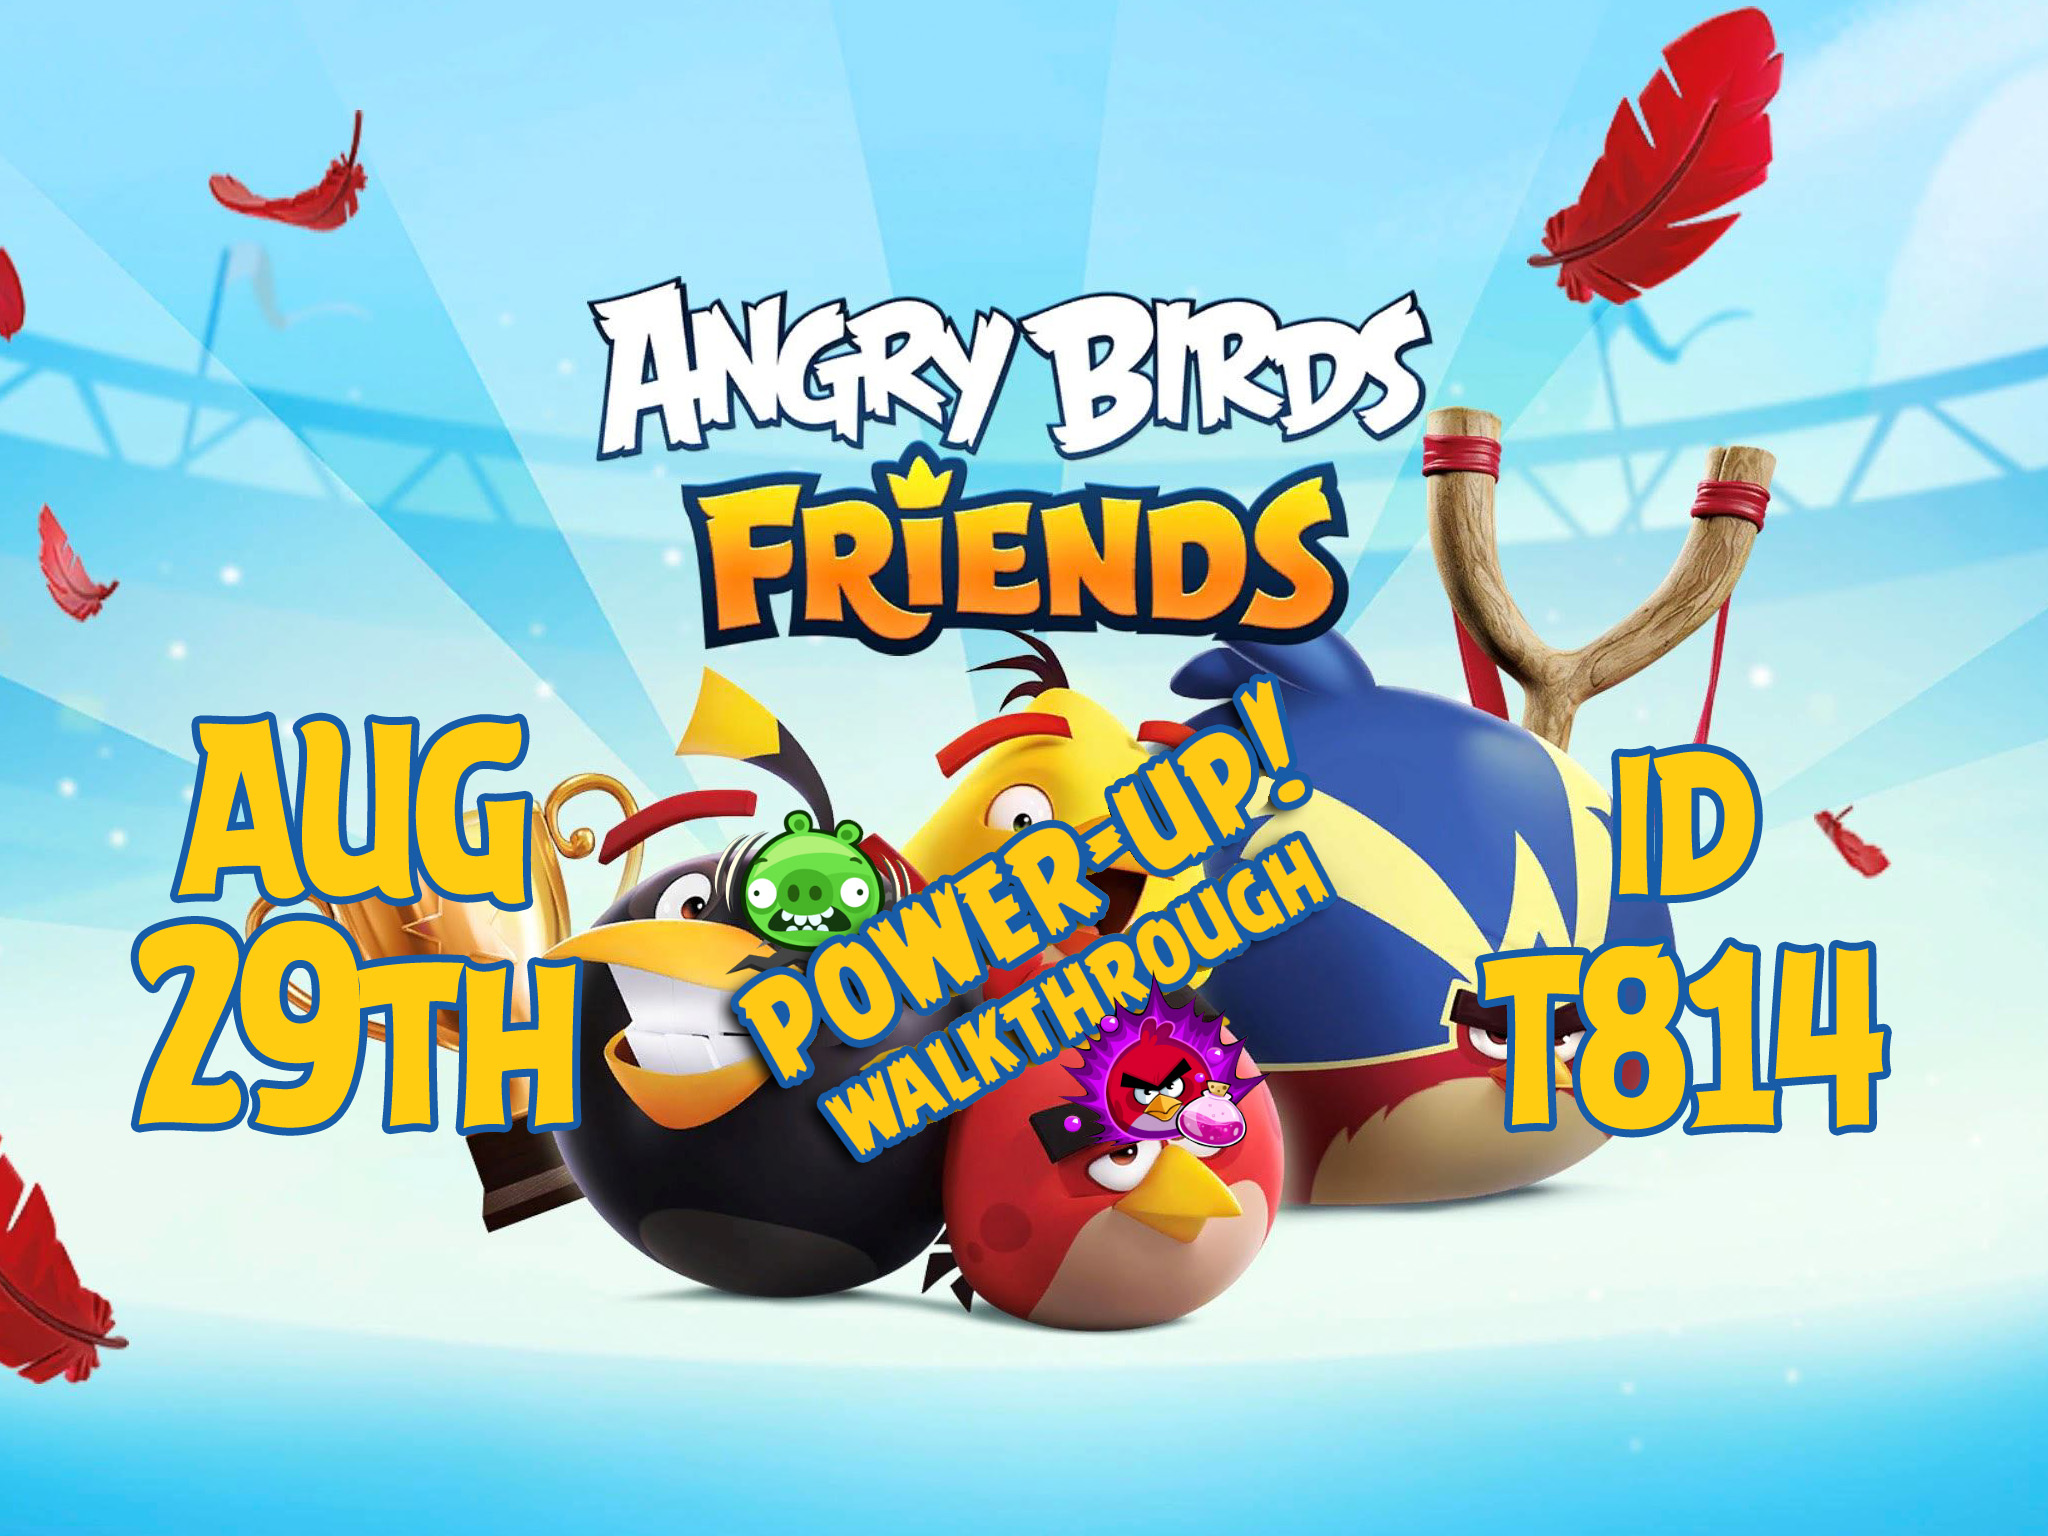 Angry-Birds-Friends-Tournament-T814-Feature-Image-PU